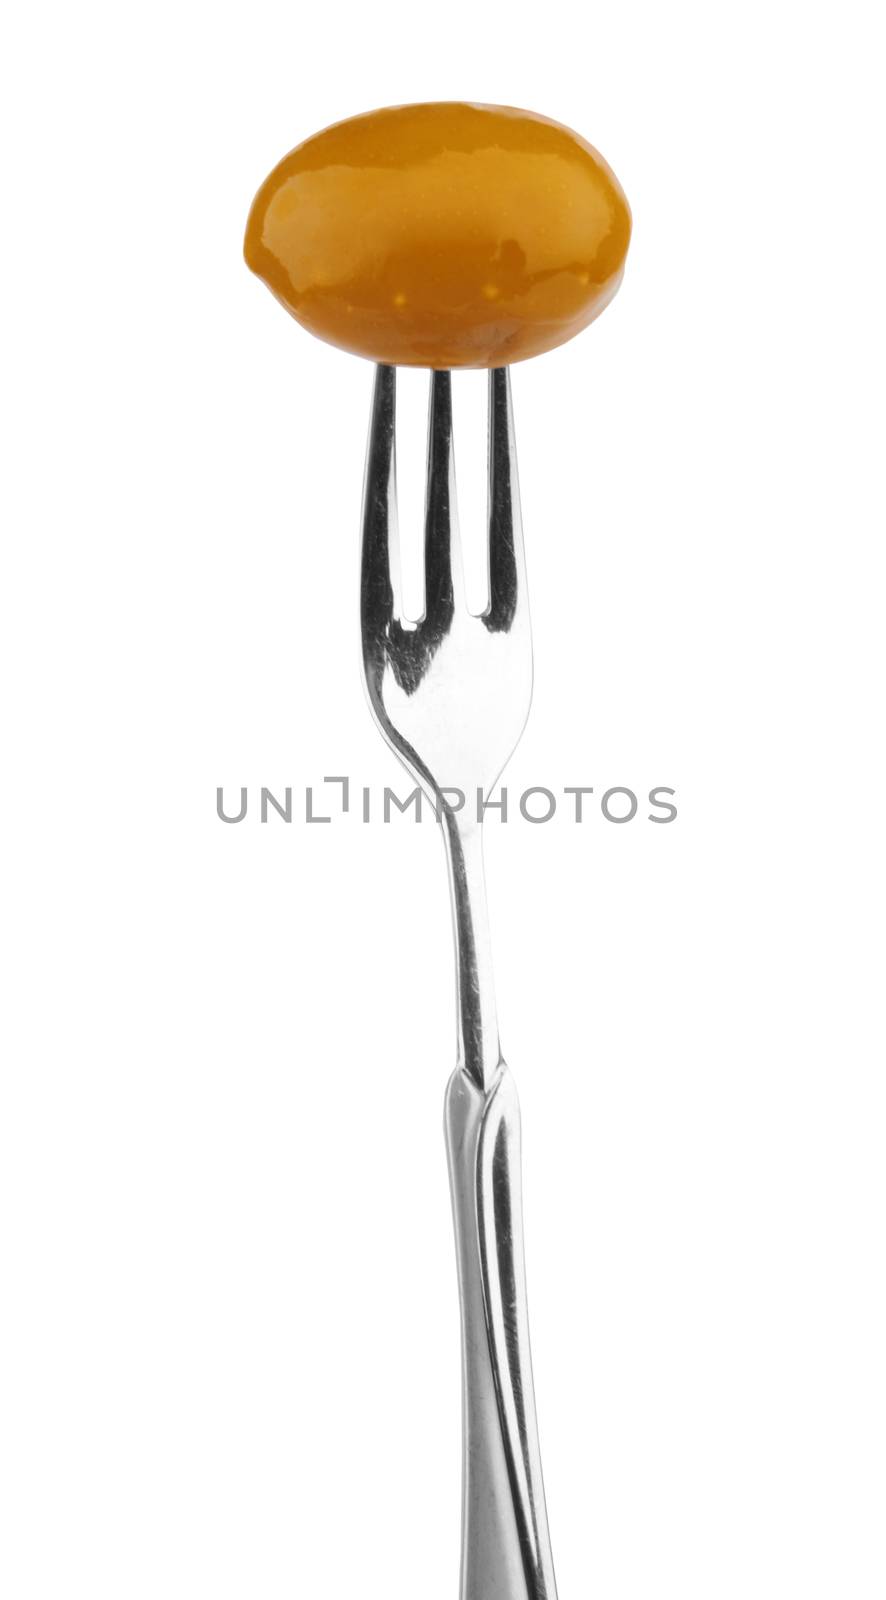 Olive on a fork isolated on a white 